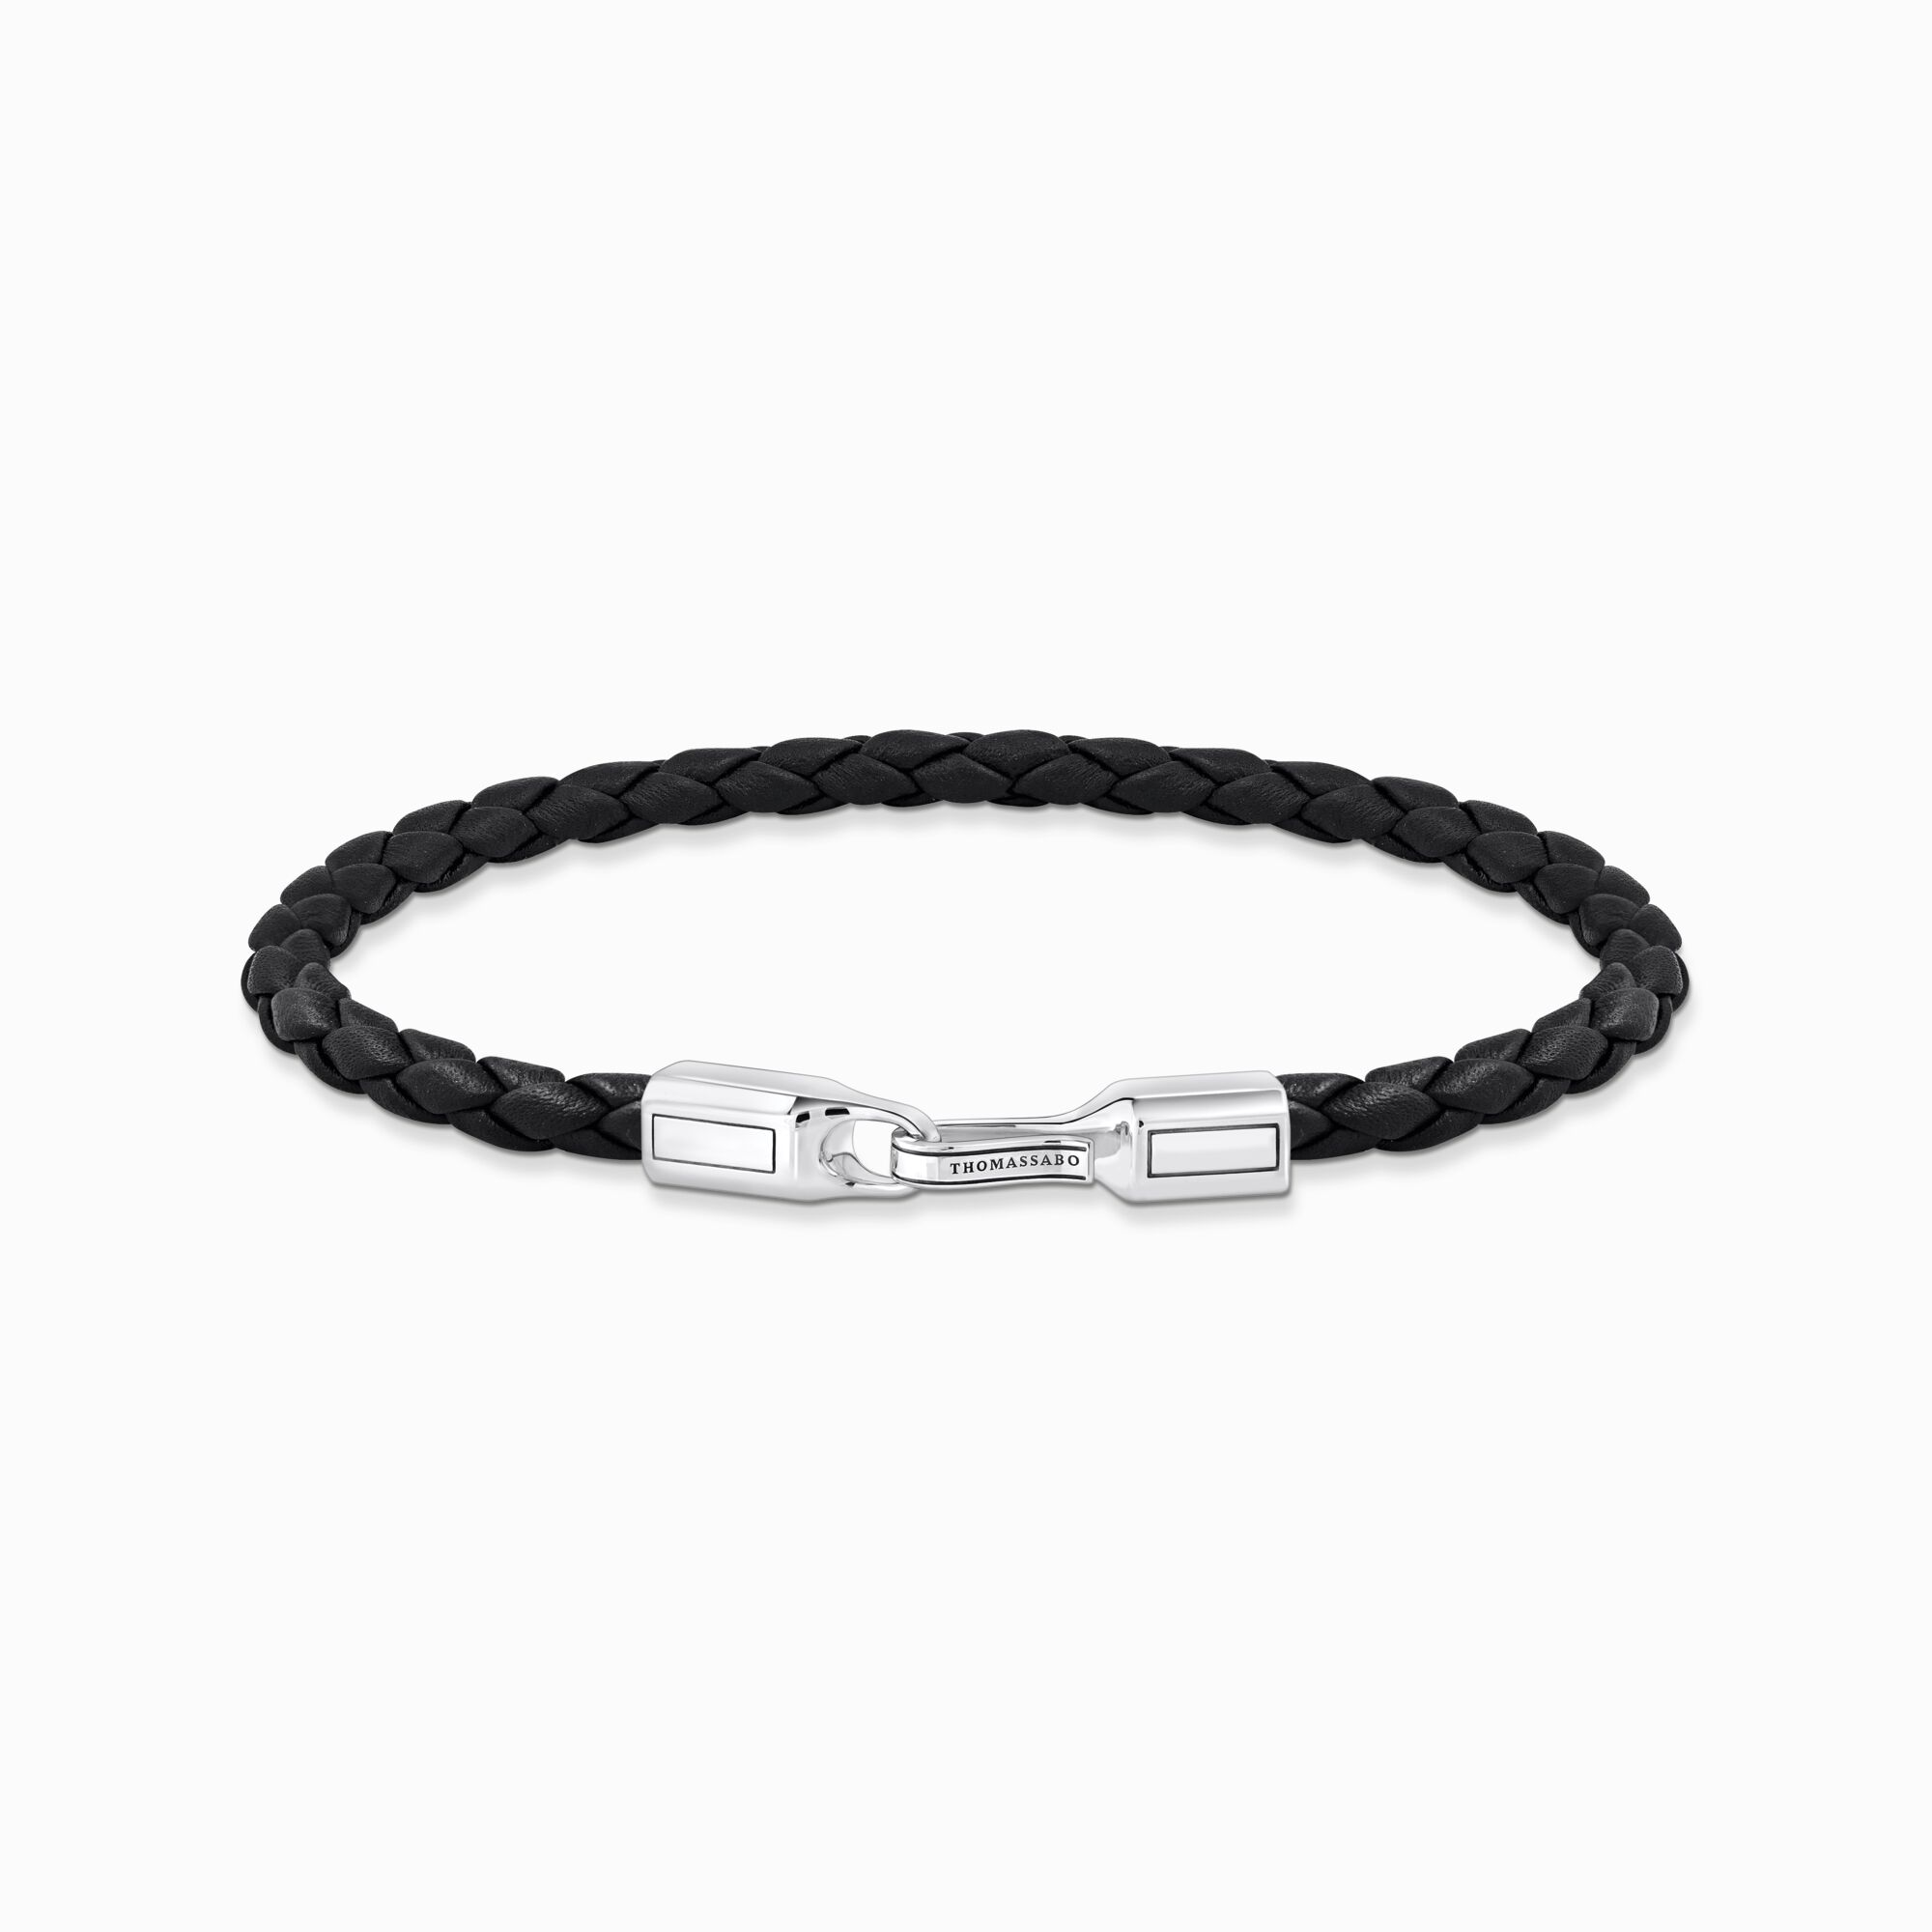 Silver bracelet with braided, black leather from the  collection in the THOMAS SABO online store